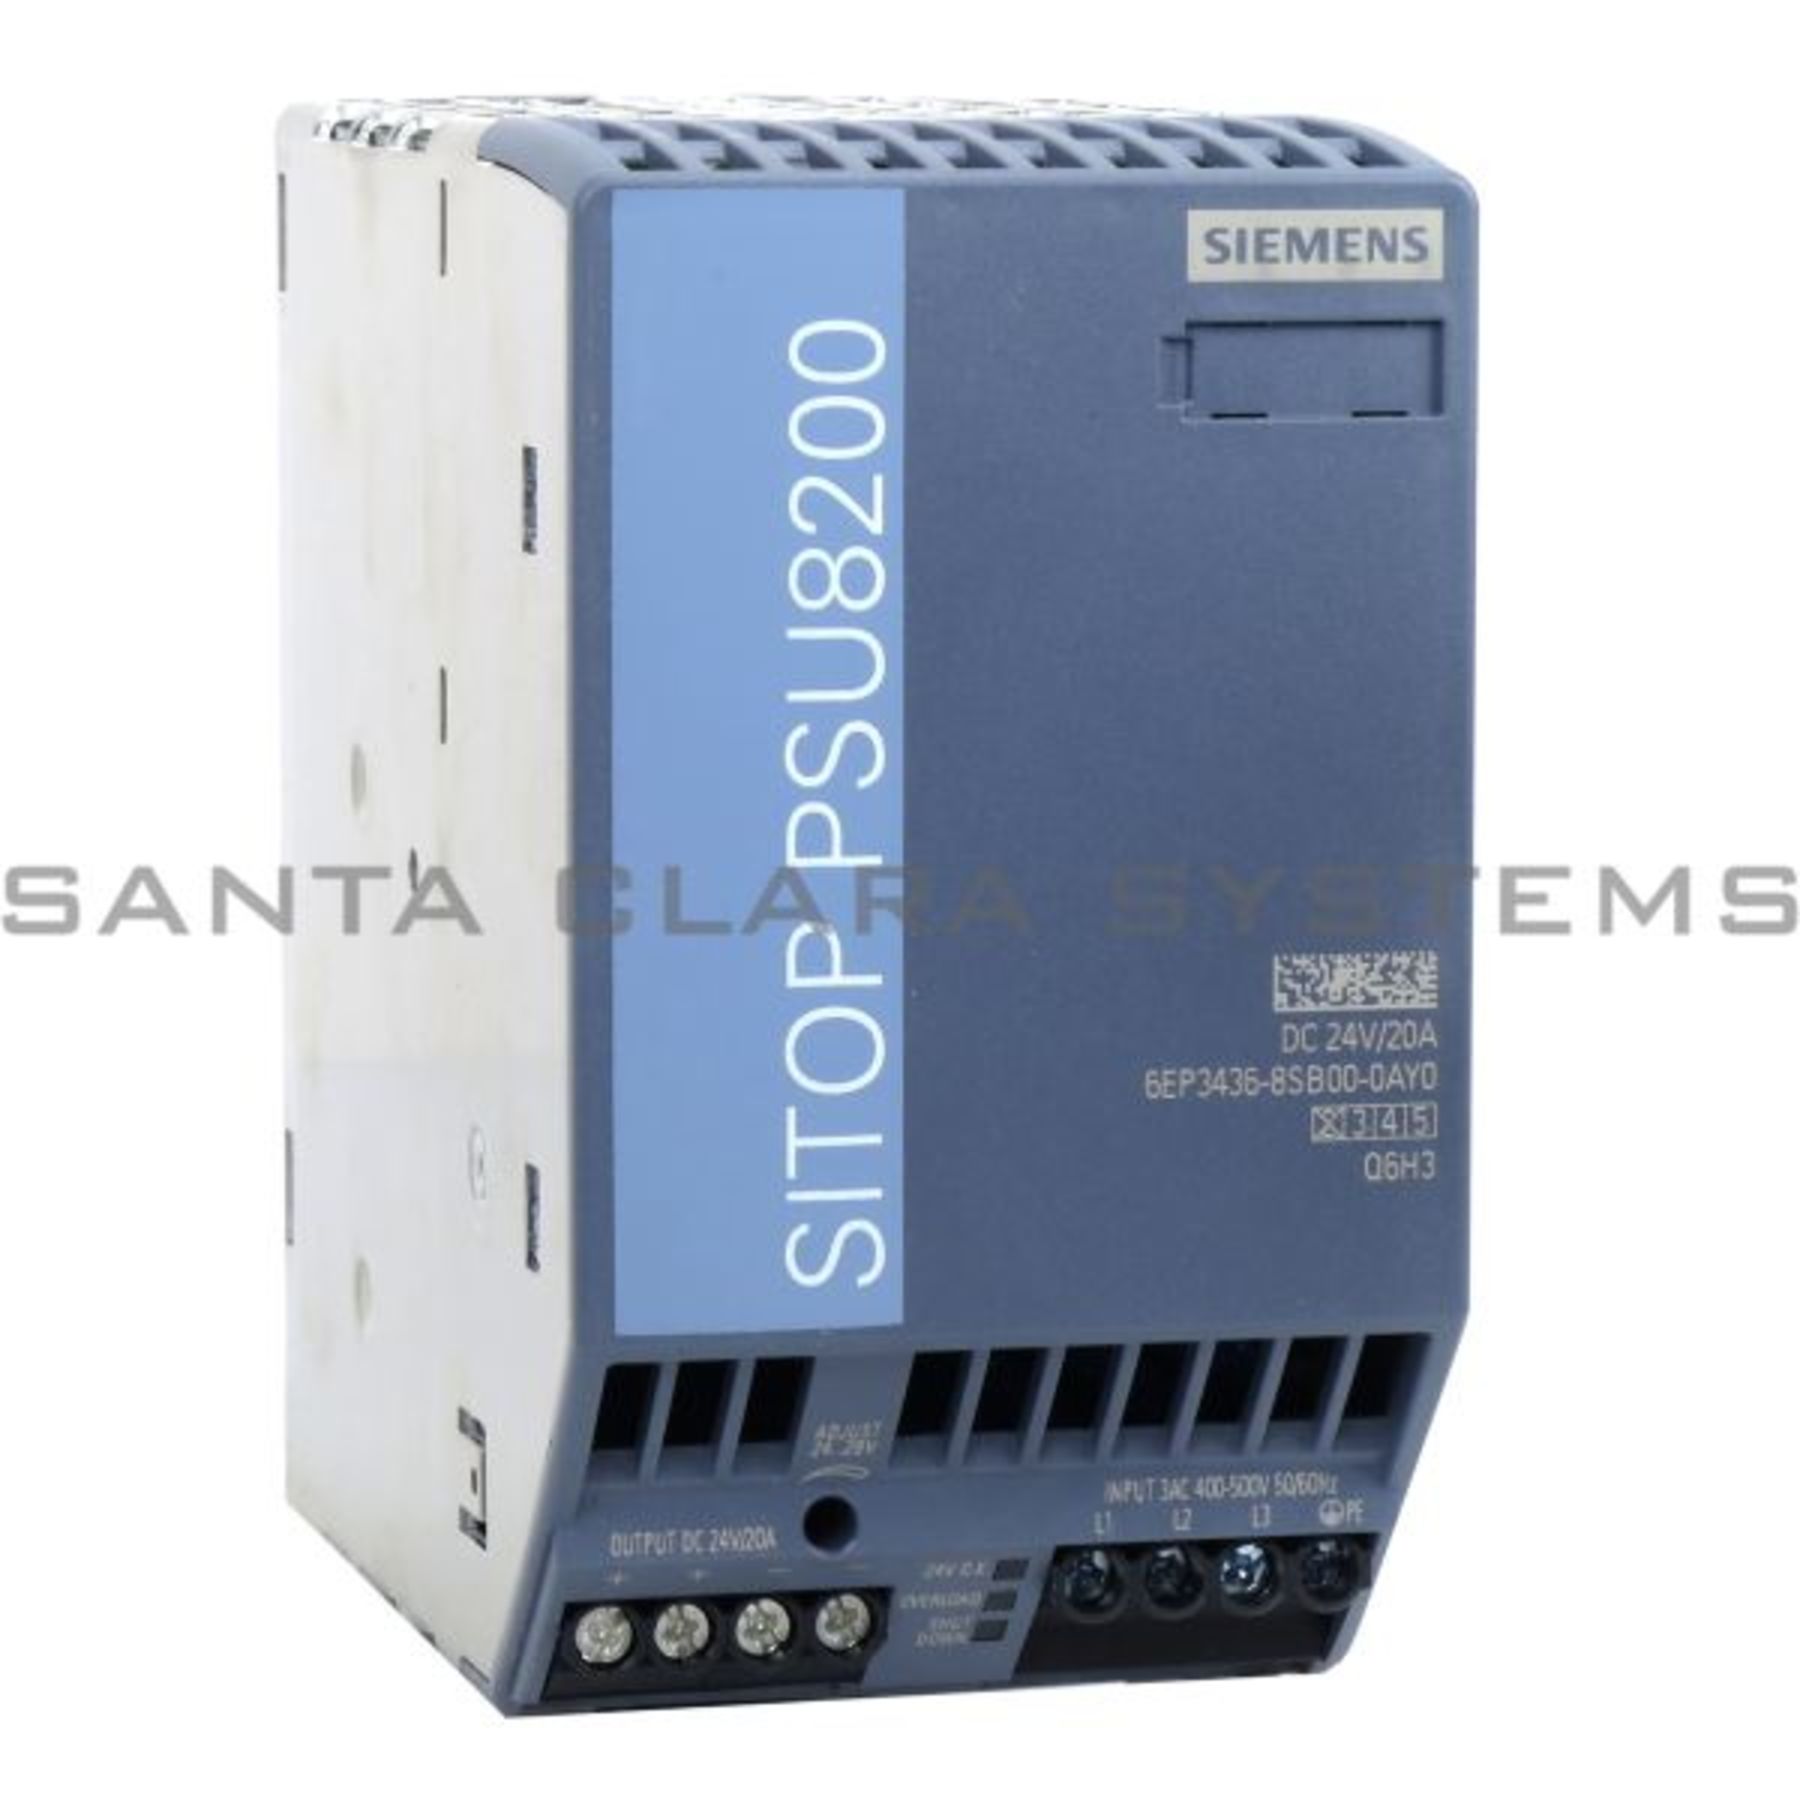 Details about   SIEMENS SMP16-SV430 POWER SUPPLY 6AR1306 